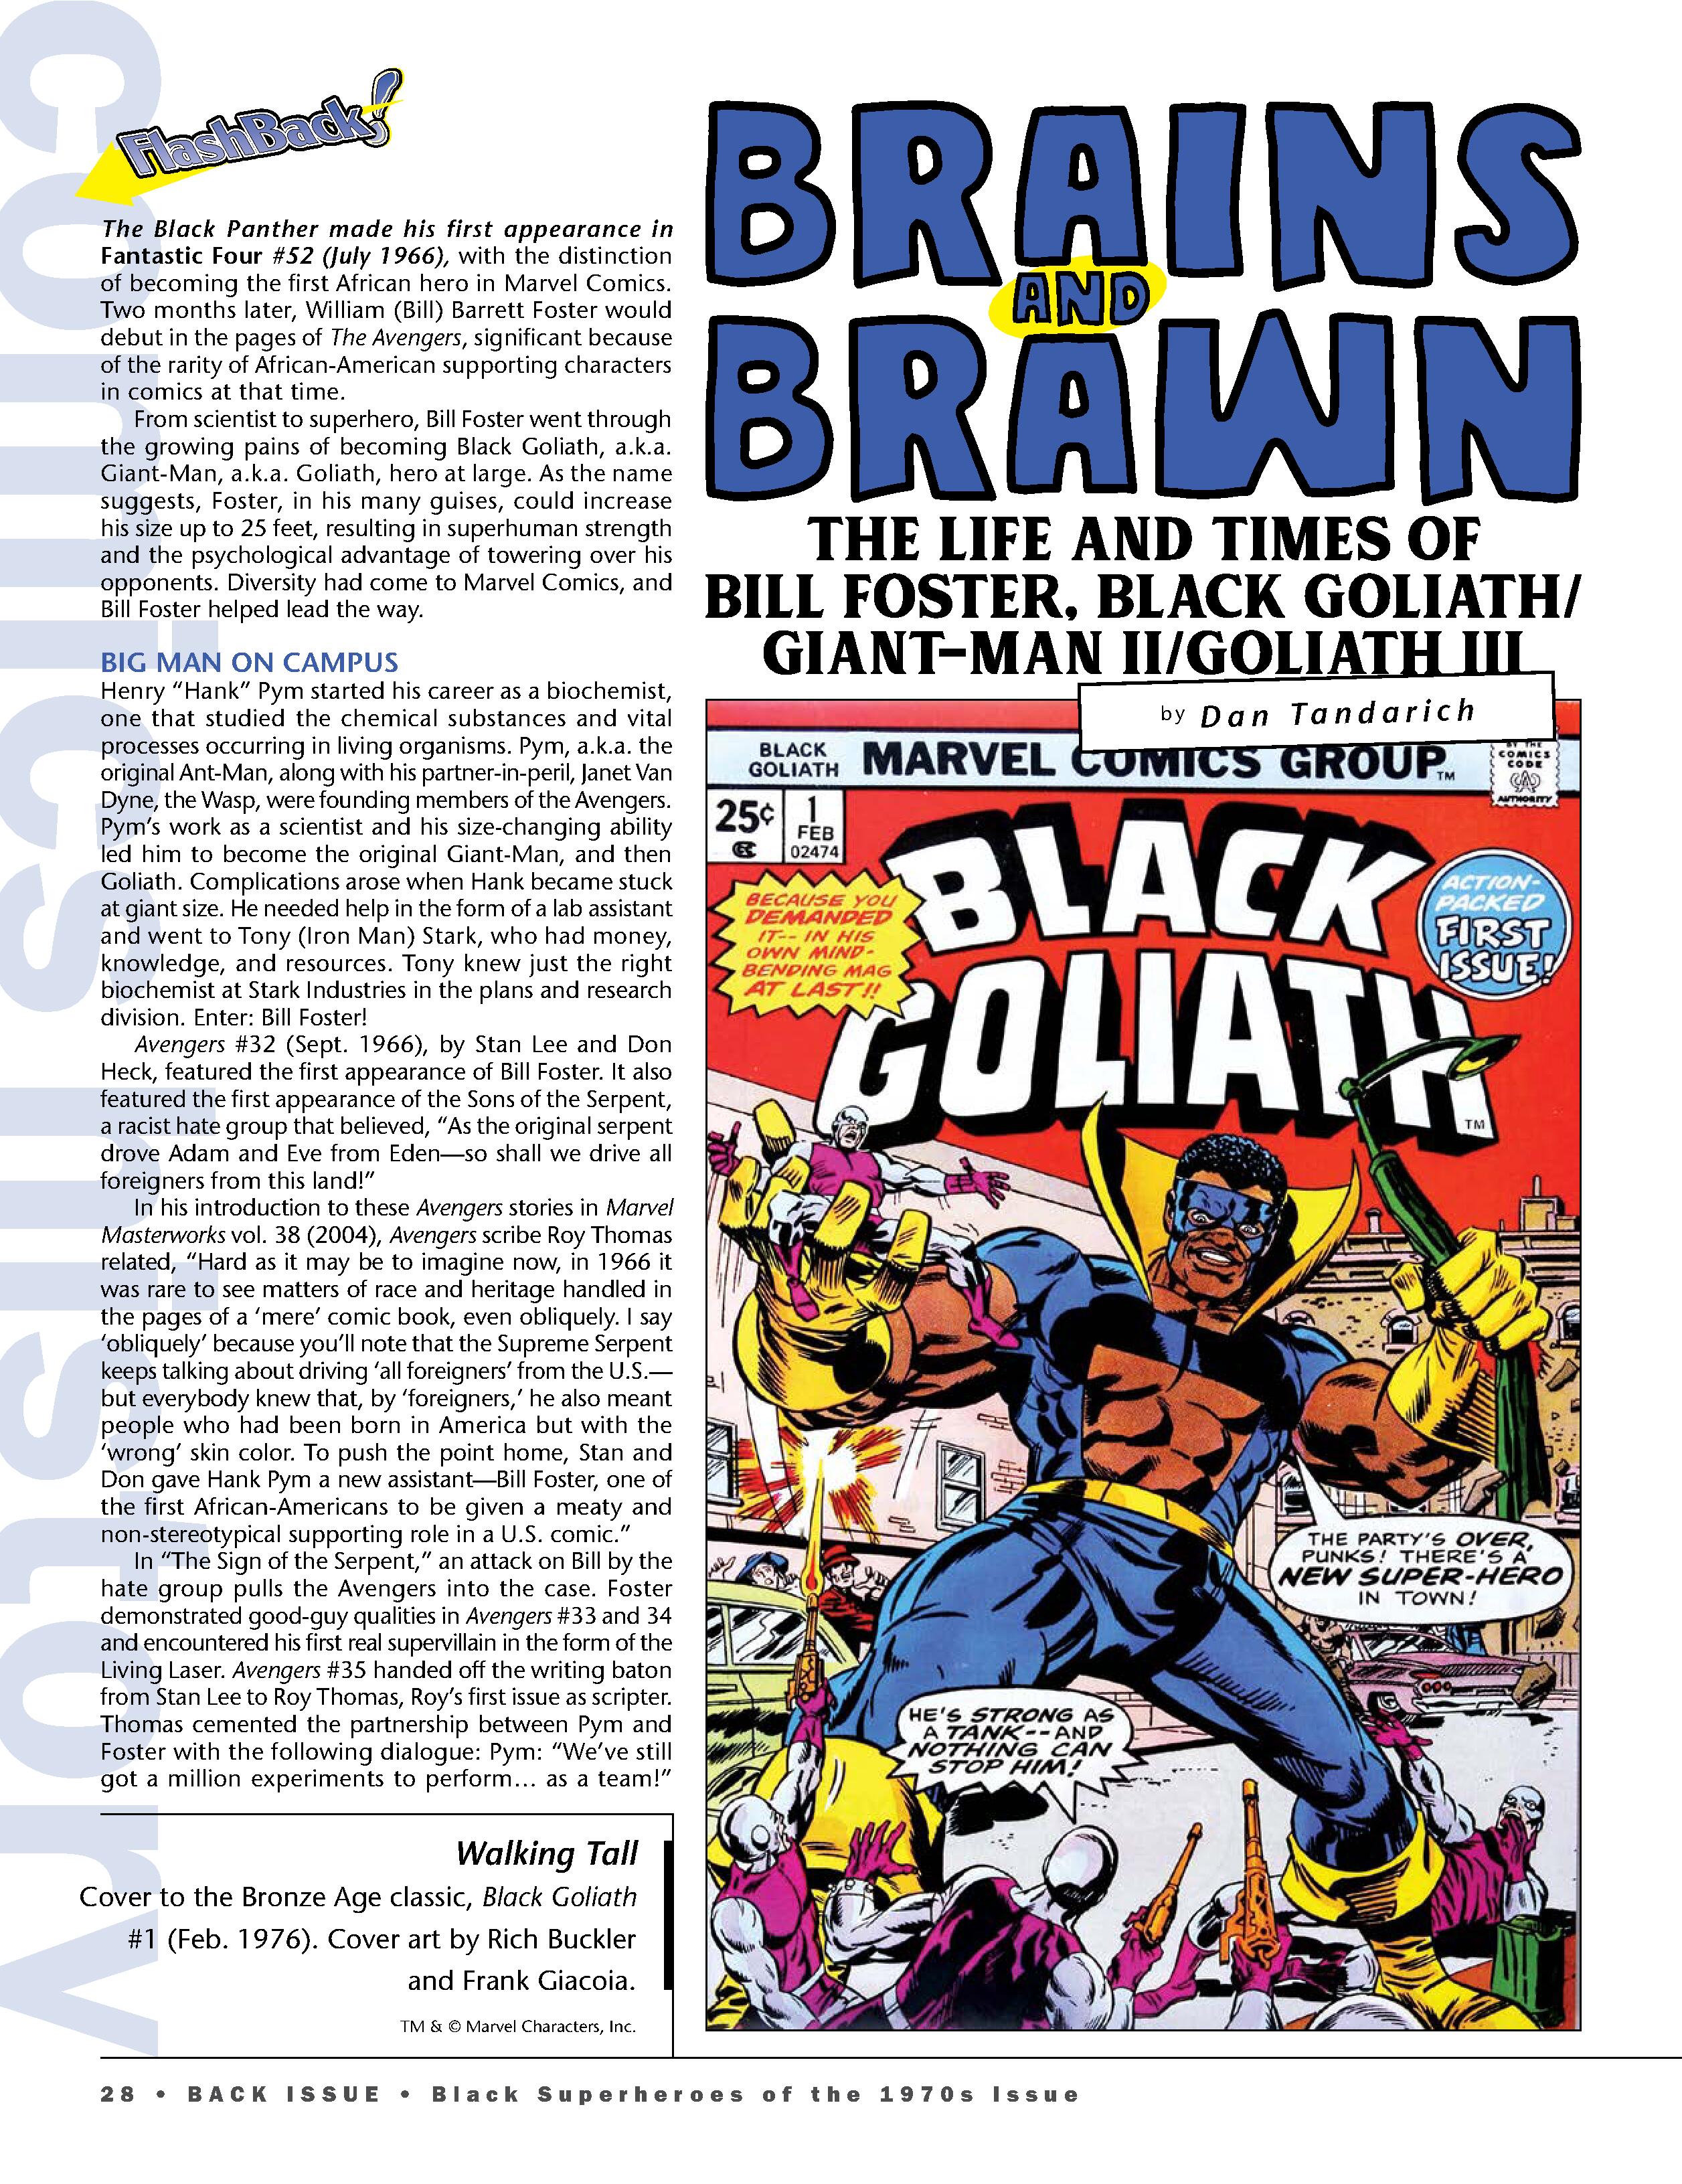 Read online Back Issue comic -  Issue #114 - 30